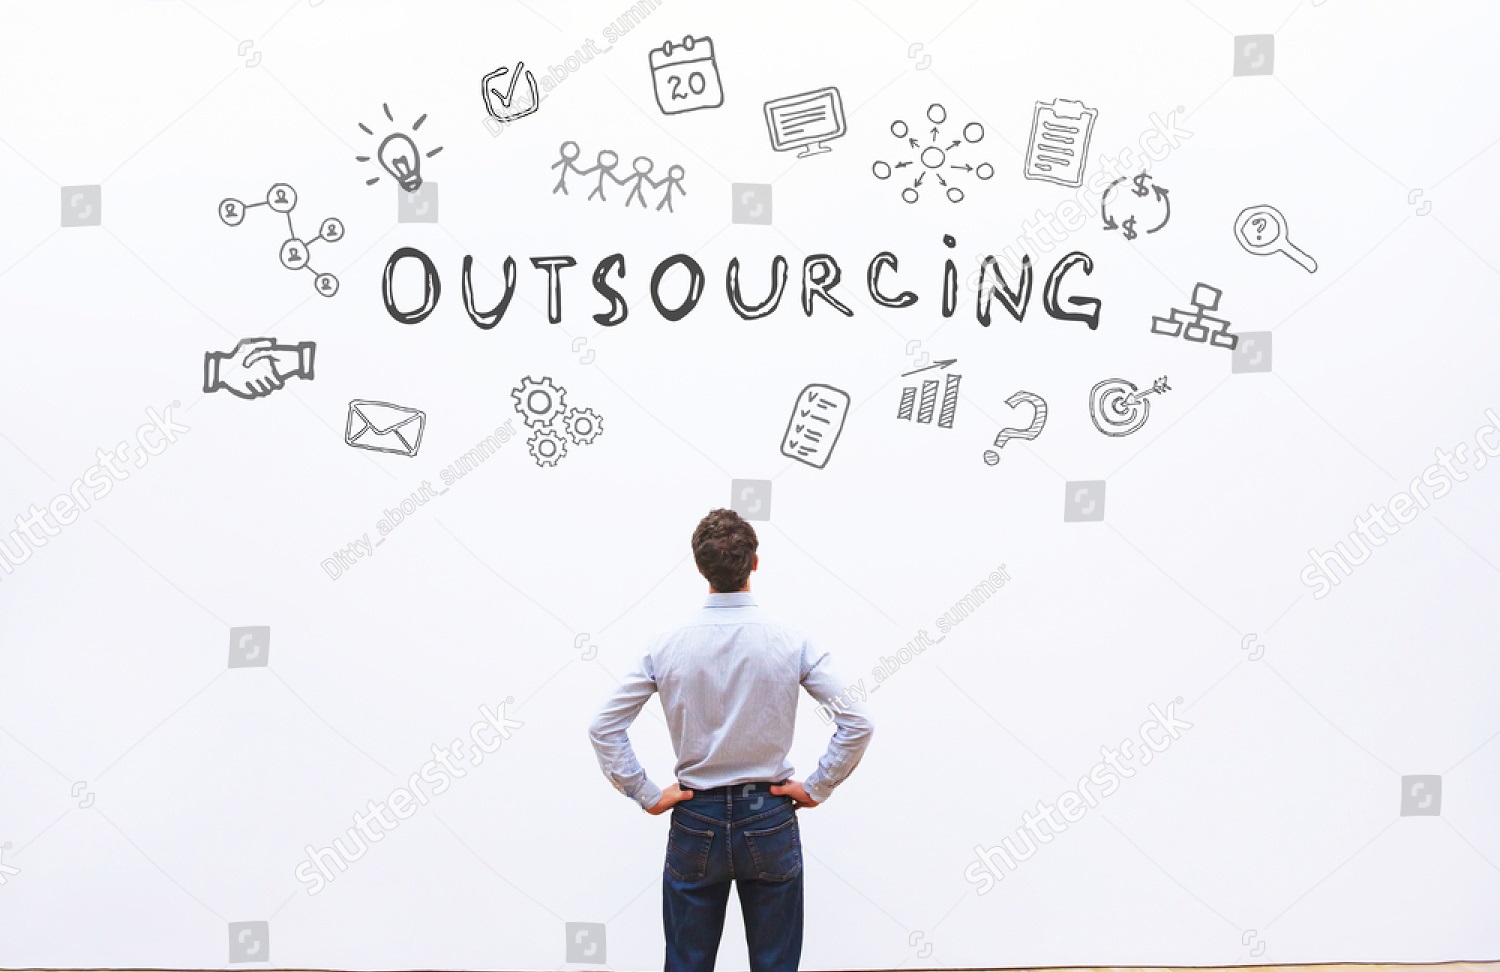 ACCOUNT’S OUTSOURCING